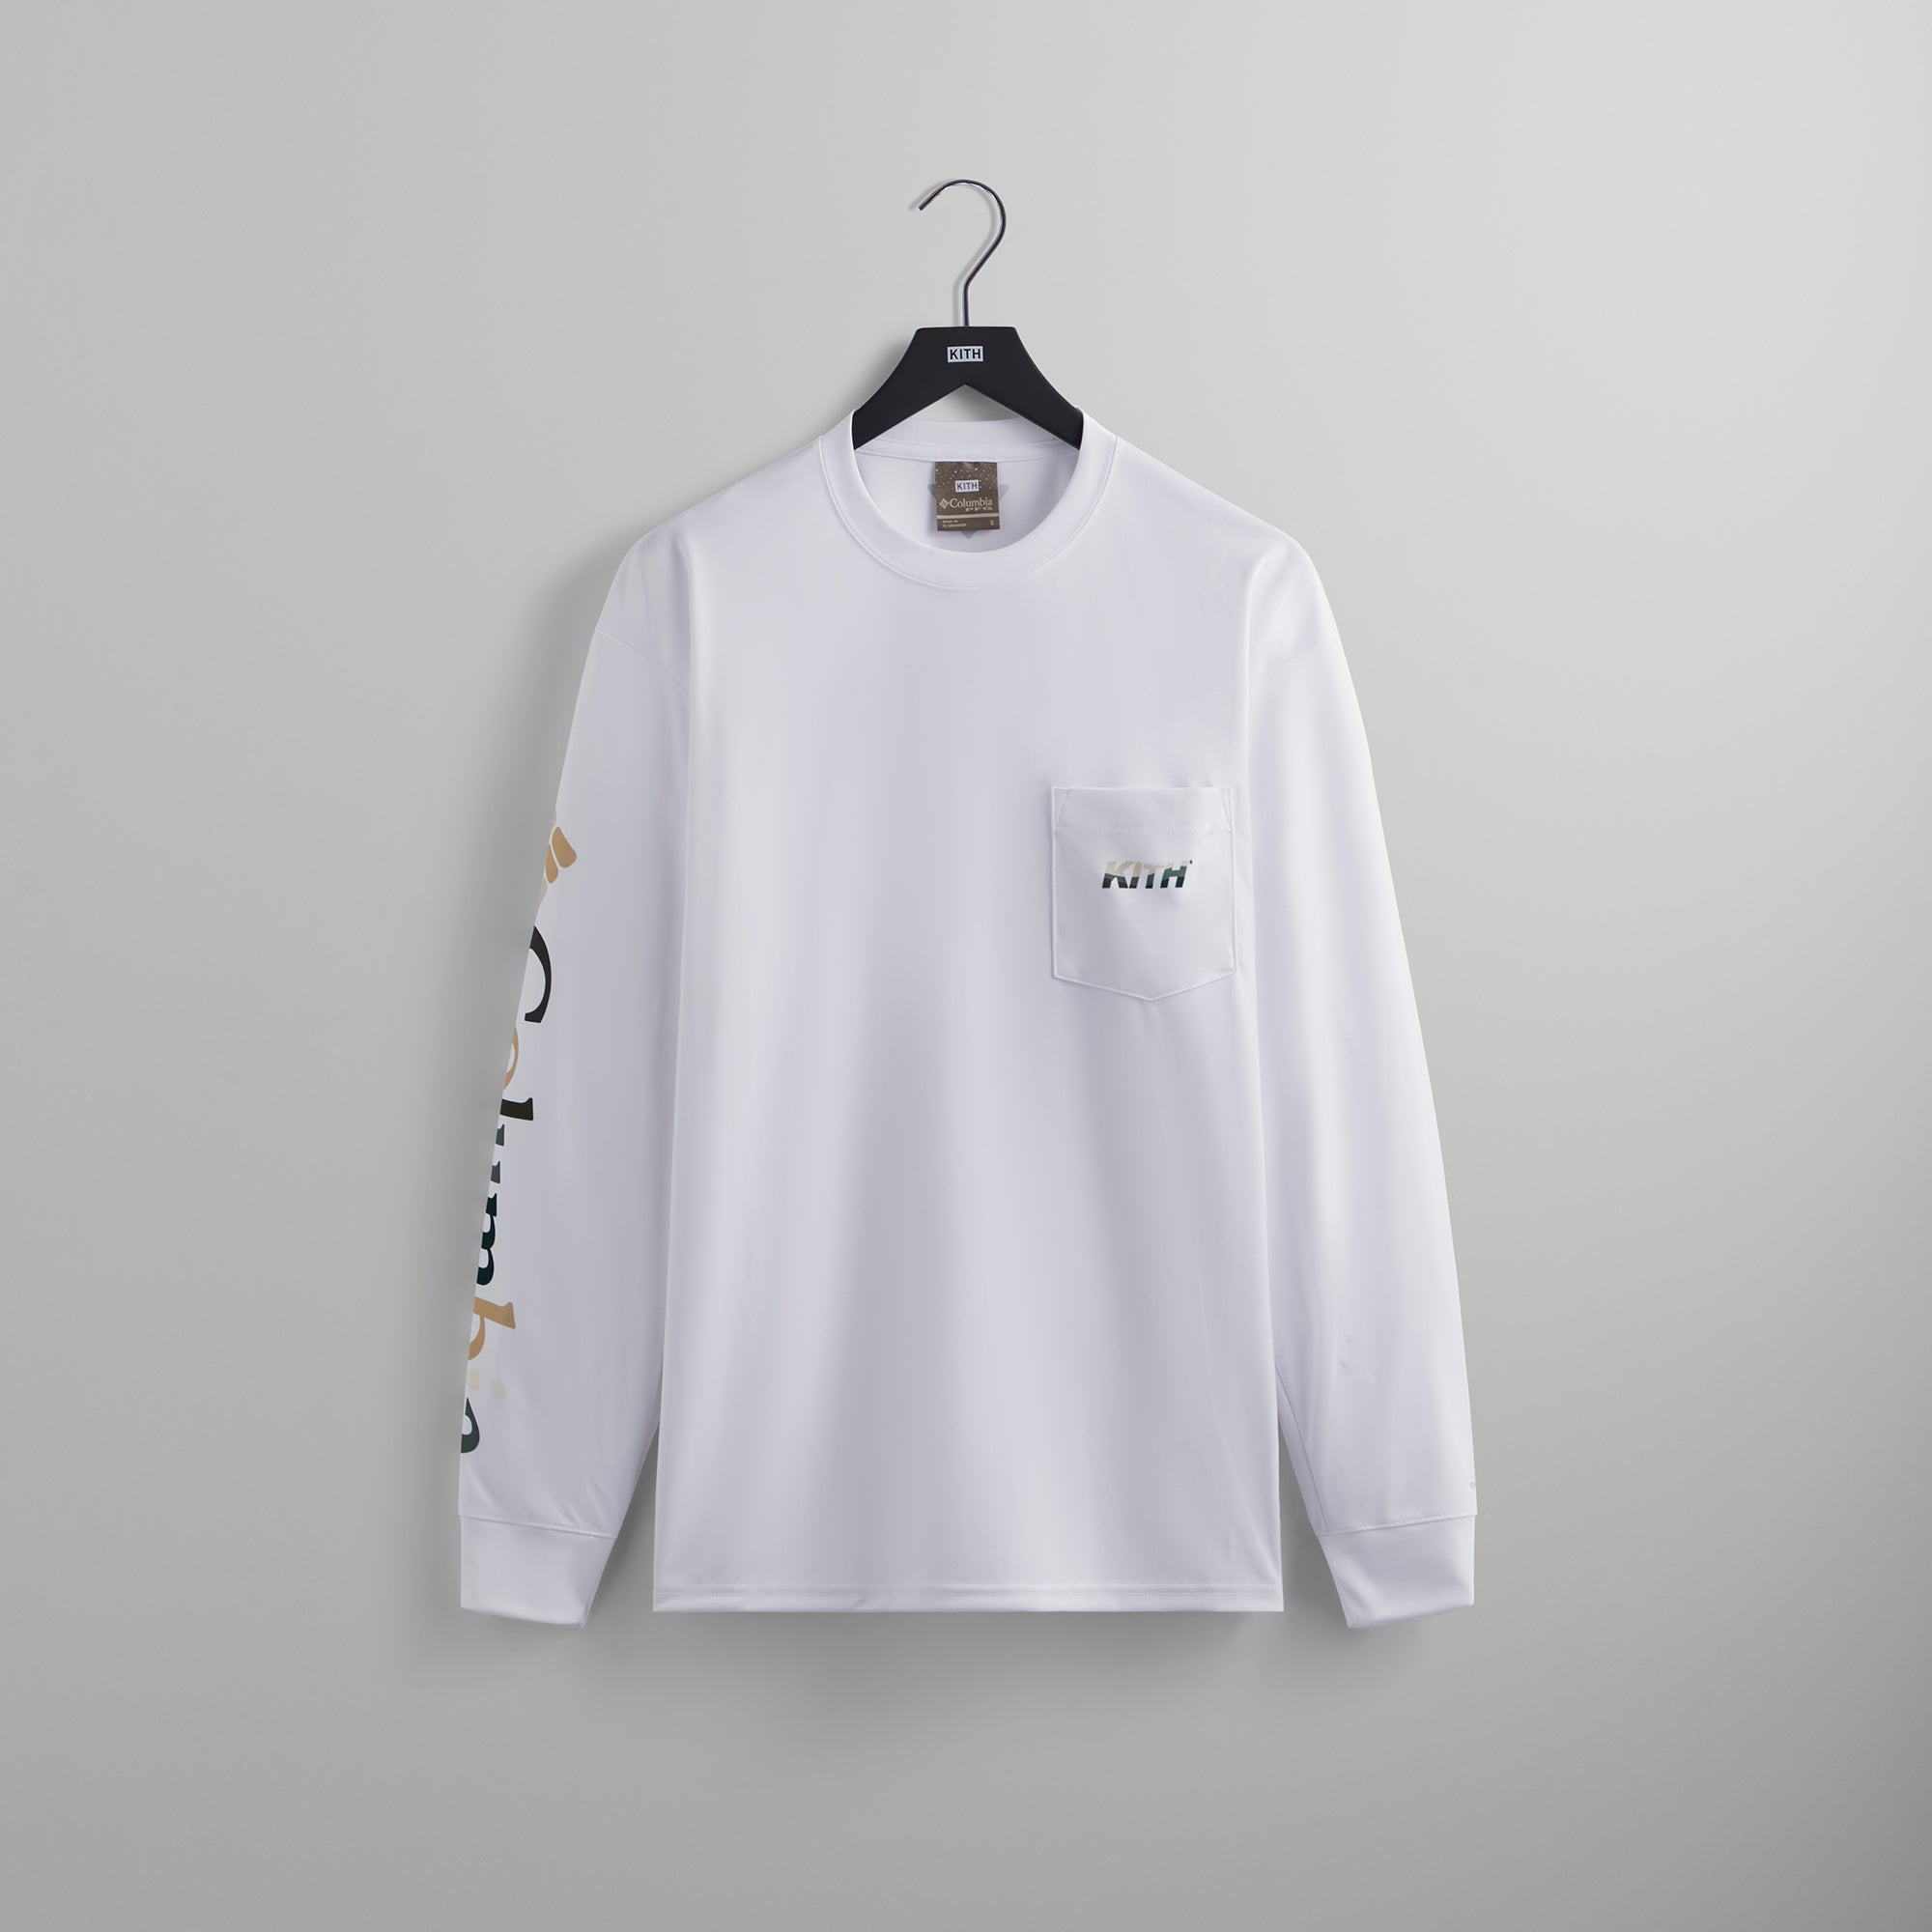 Kith for Columbia PFG Terminal Tackle™ Long Sleeve - White